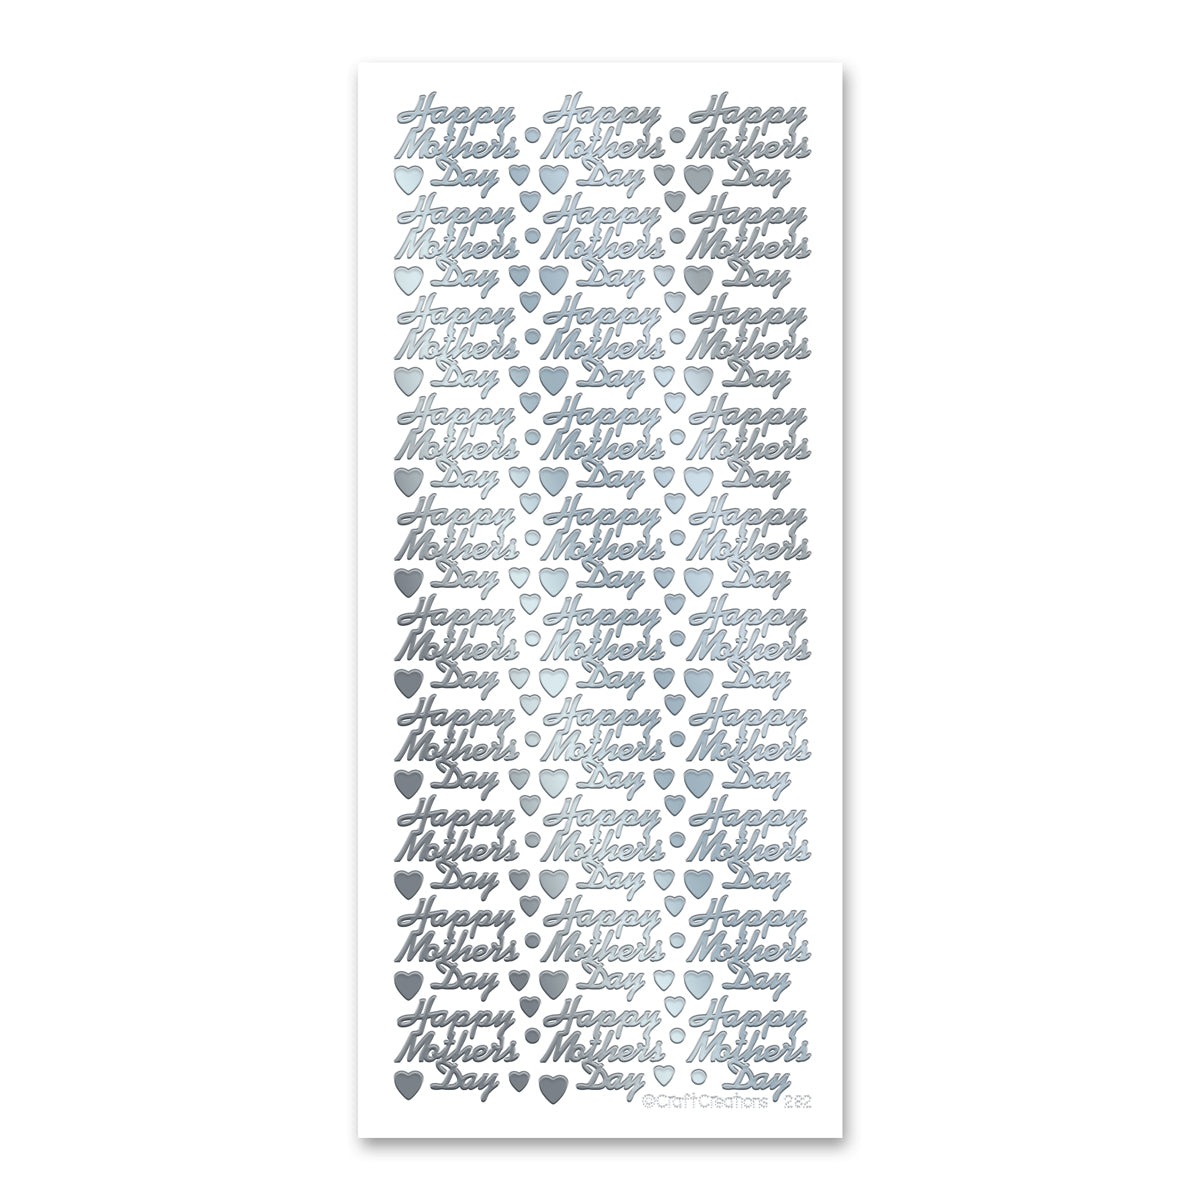 Happy Mother's Day Hearts Silver Self Adhesive Stickers